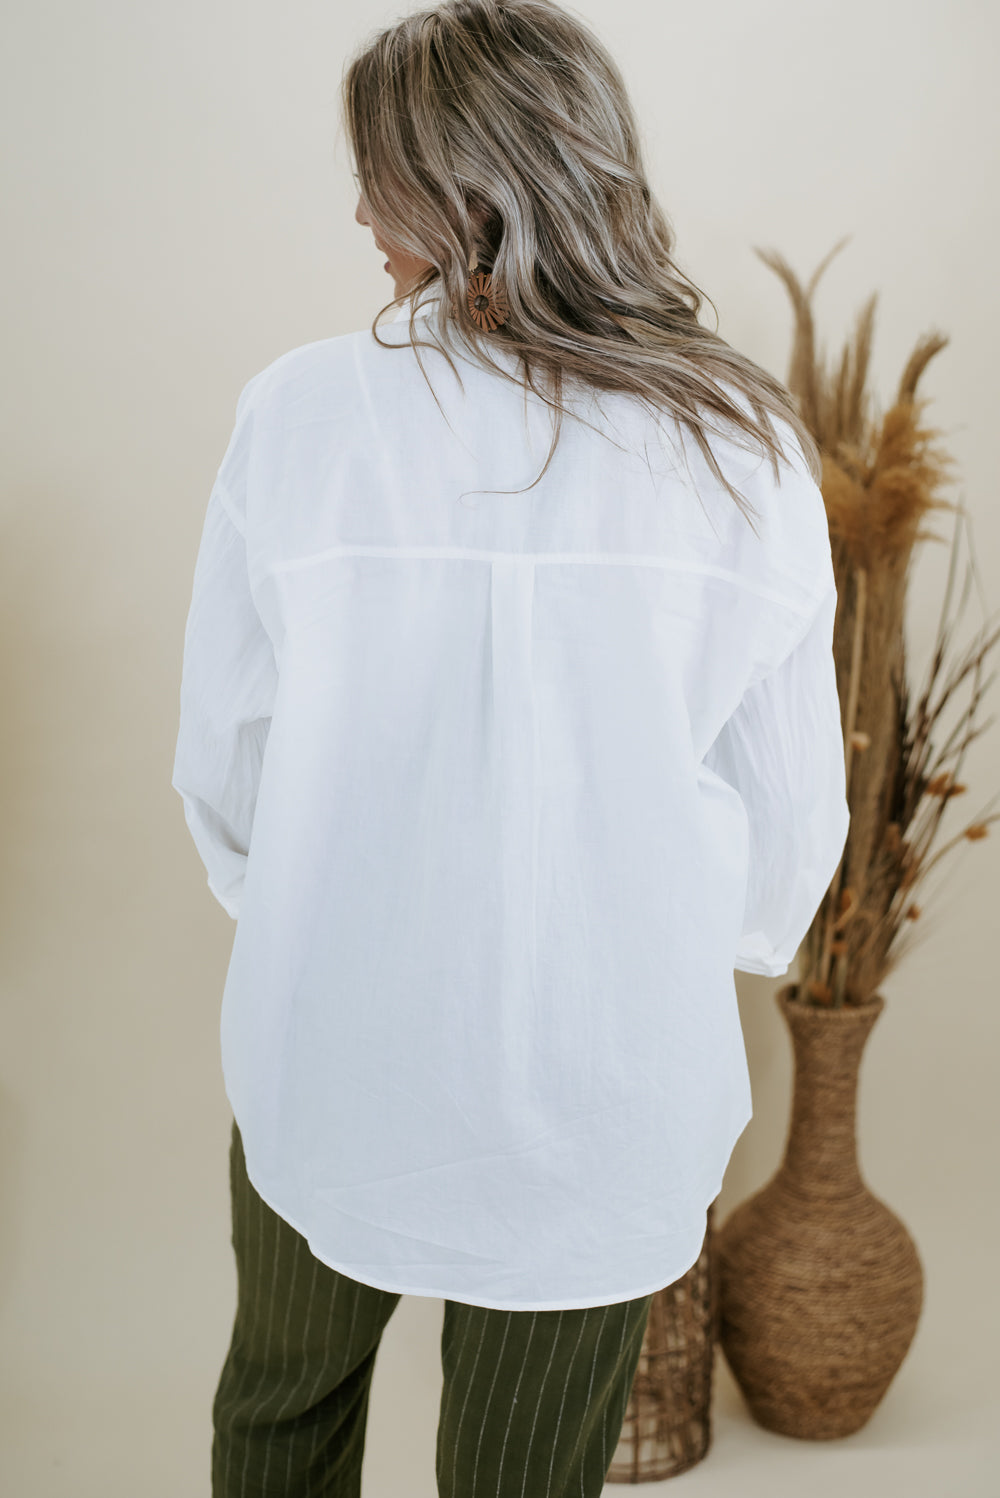 Big Chill Slouchy Button Up, White